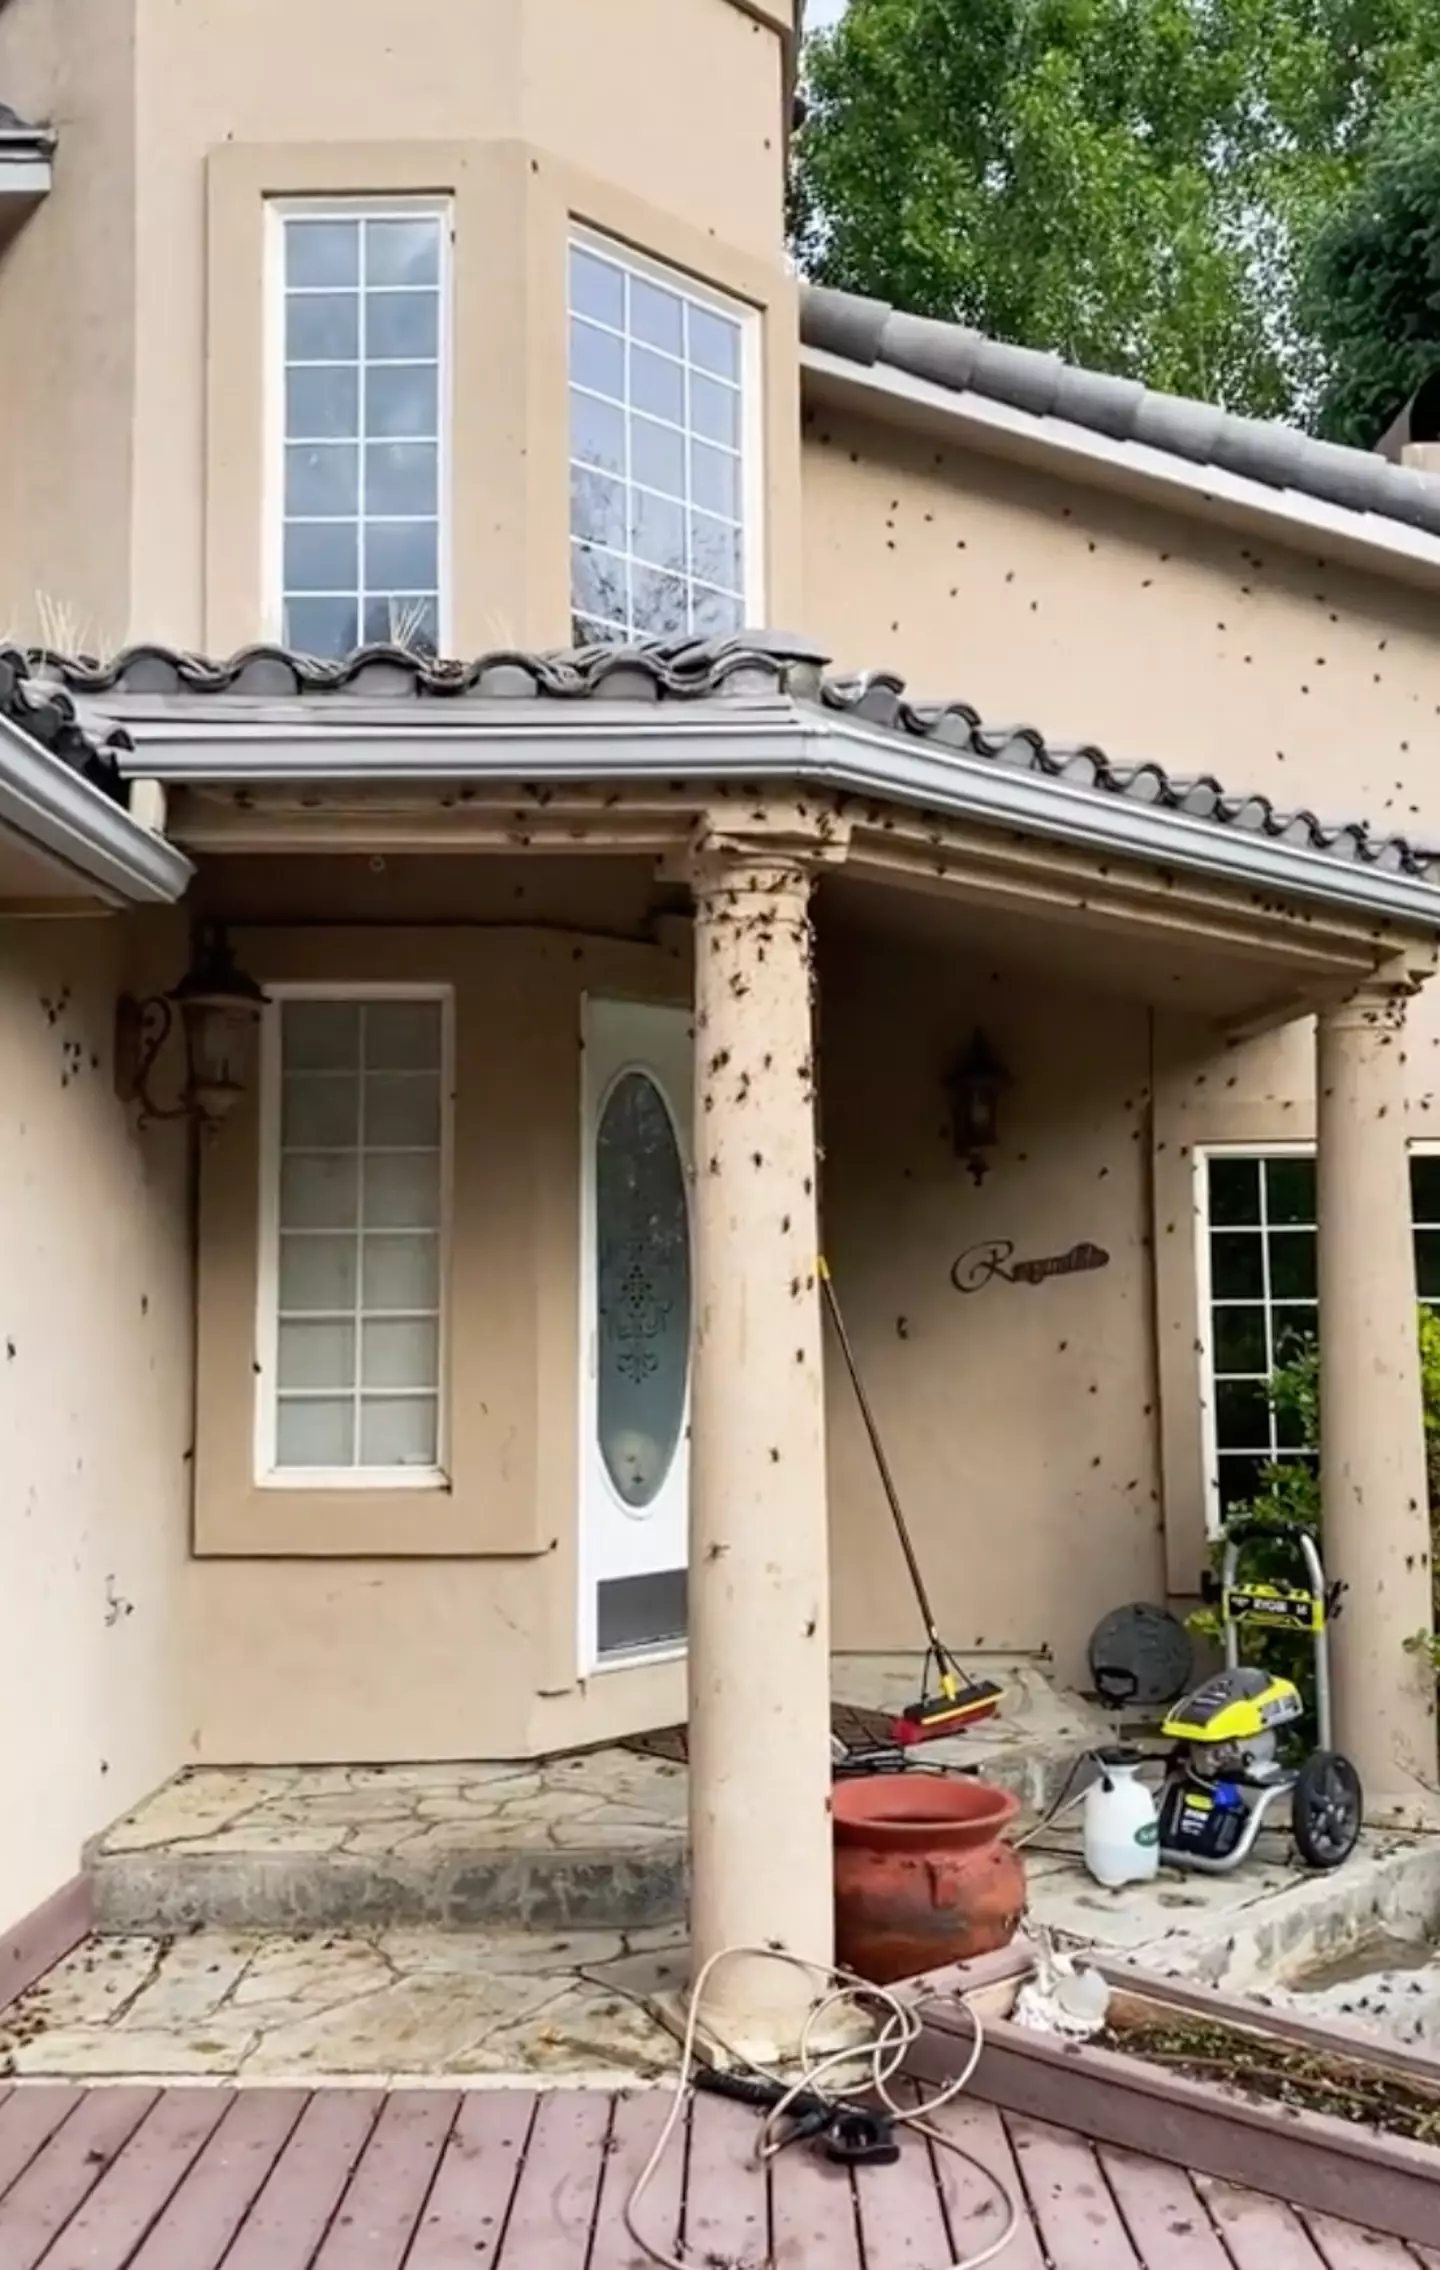 The horrified homeowner said it was the most disgusting day of her life.